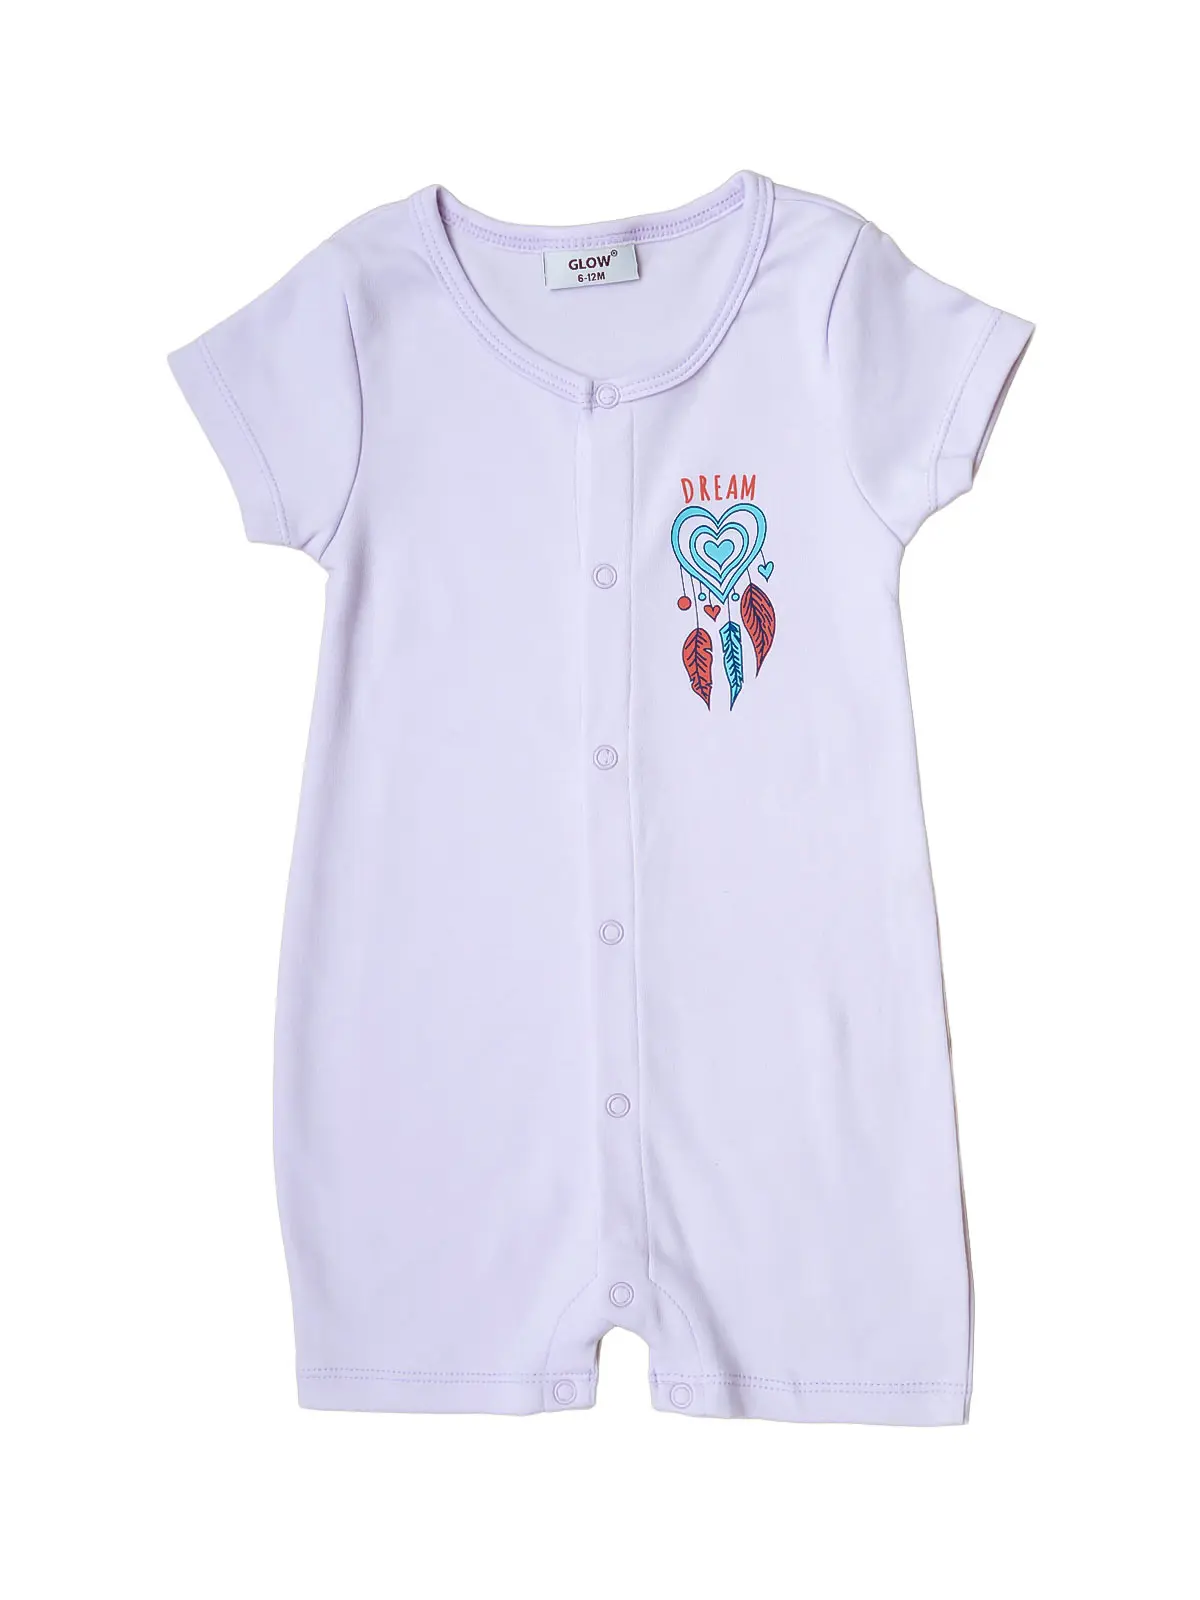 Baby Heart Snap-Up Romper